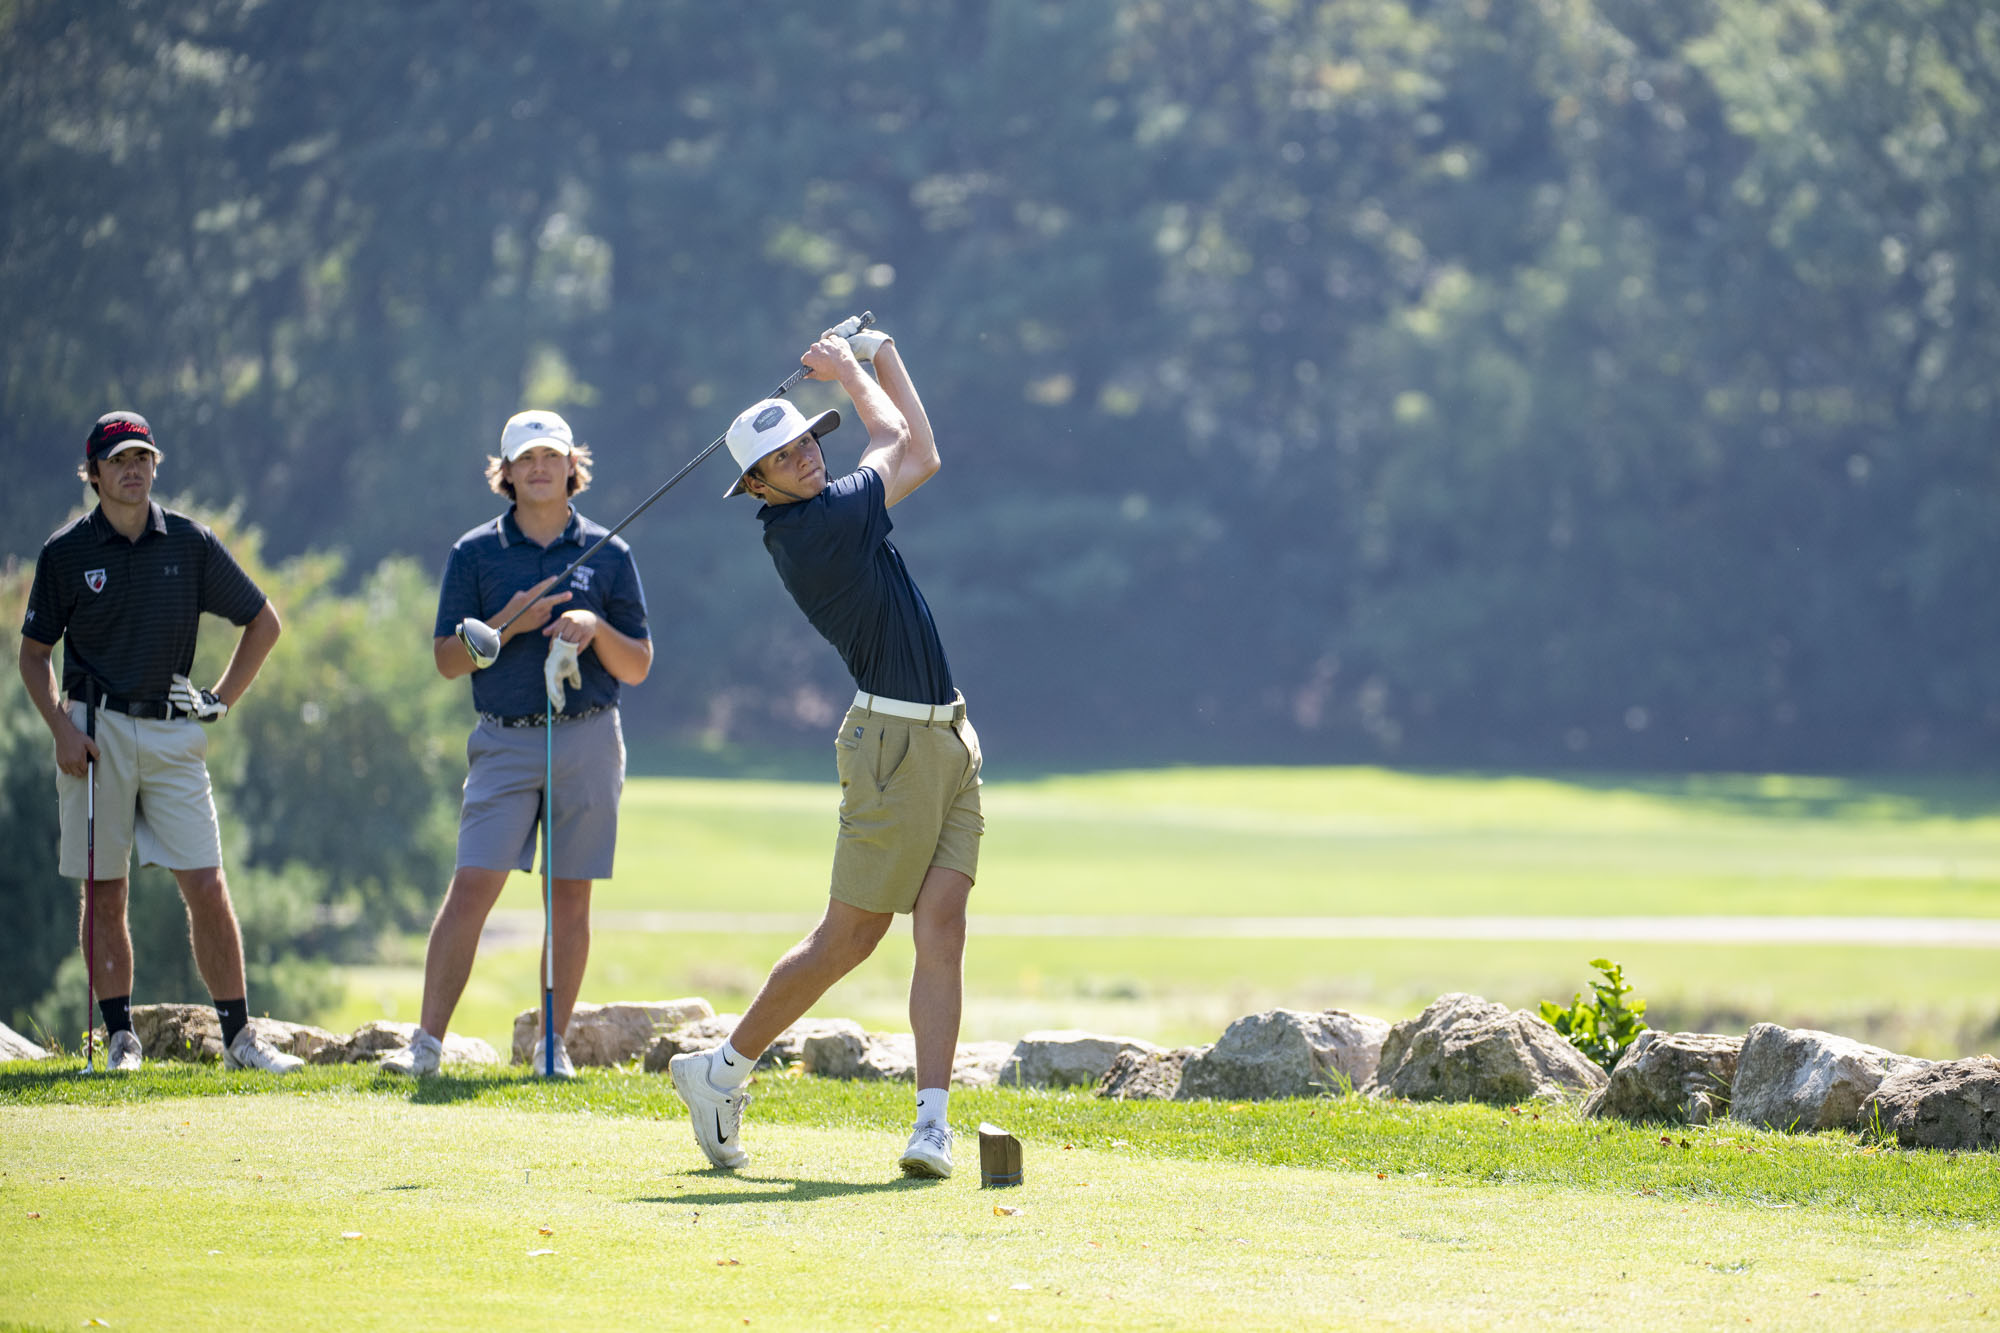 Men's Golf Captures First Place at Wrigglesworth Invitational